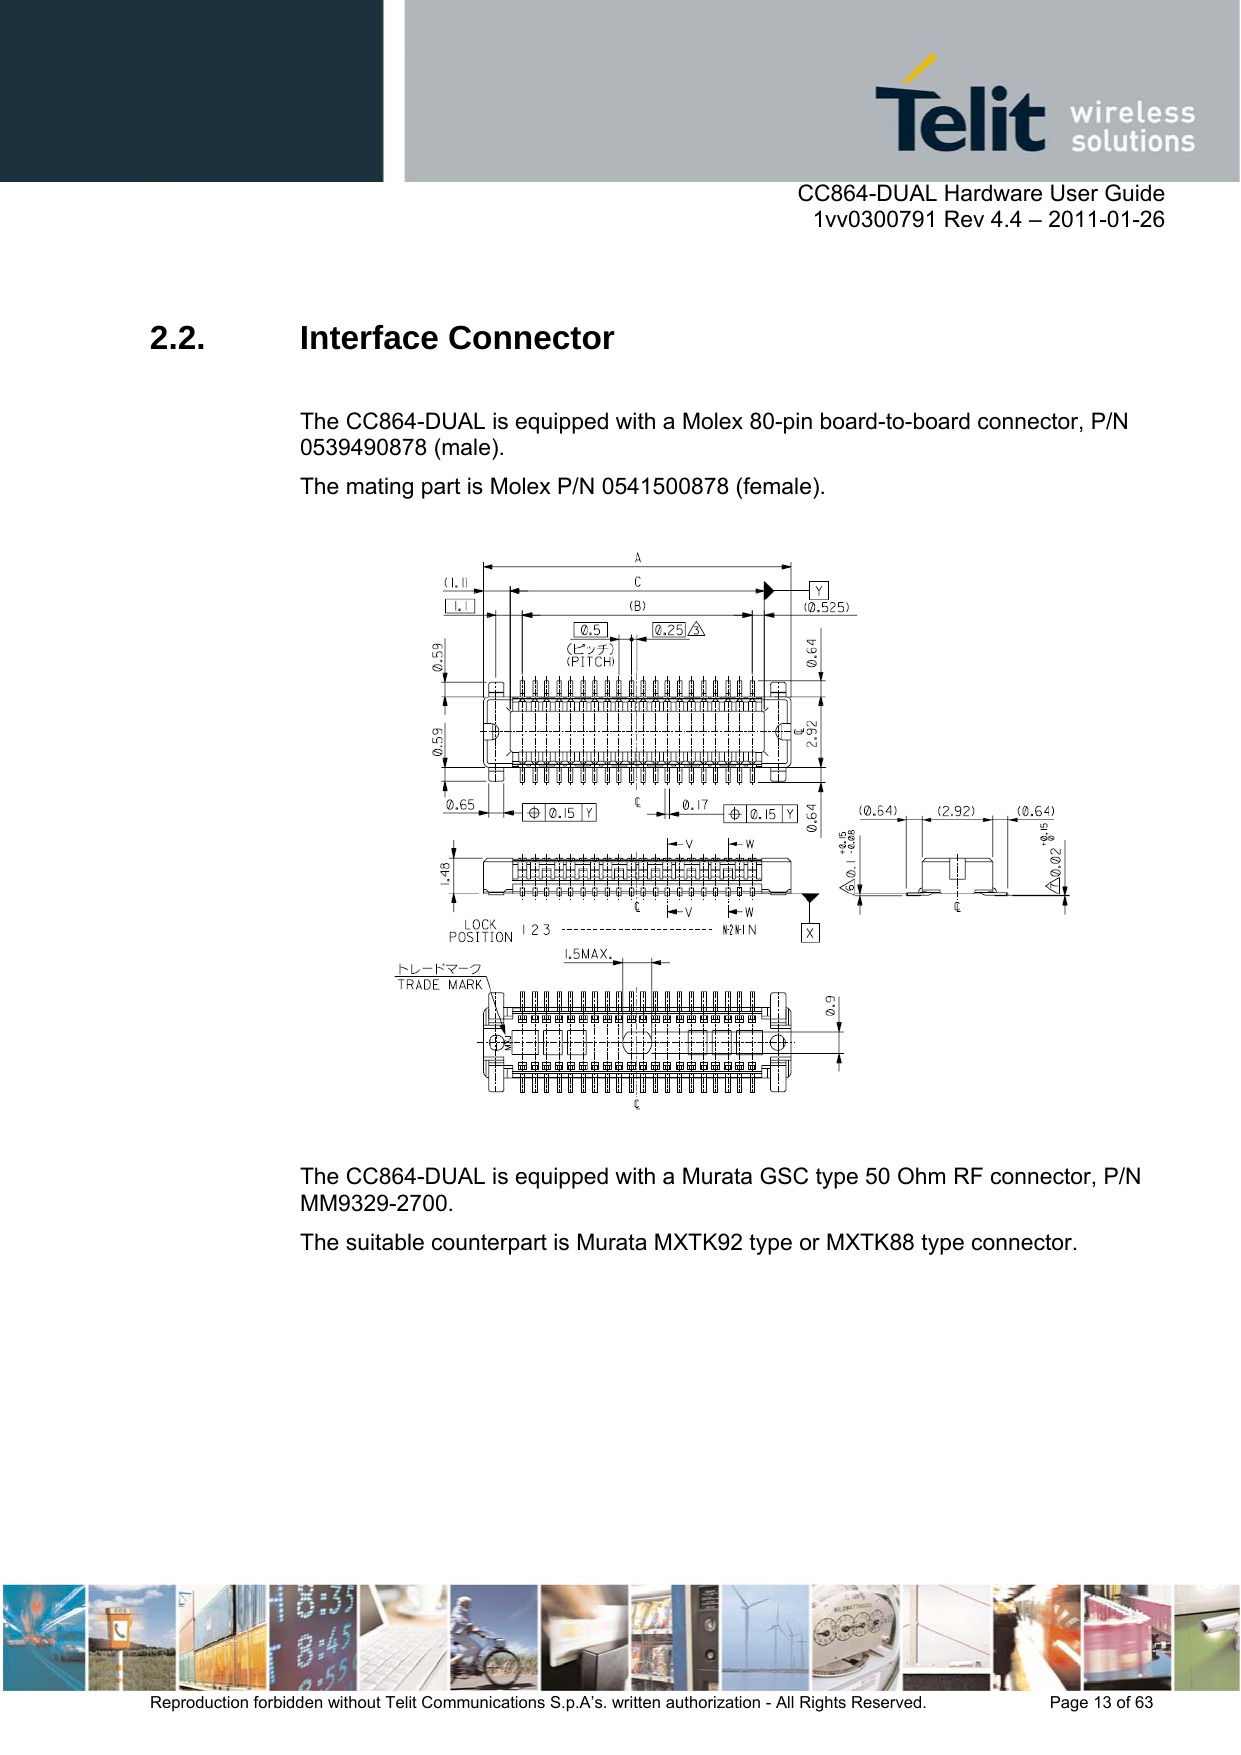      CC864-DUAL Hardware User Guide    1vv0300791 Rev 4.4 – 2011-01-26  Reproduction forbidden without Telit Communications S.p.A’s. written authorization - All Rights Reserved.    Page 13 of 63   2.2. Interface Connector  The CC864-DUAL is equipped with a Molex 80-pin board-to-board connector, P/N 0539490878 (male).  The mating part is Molex P/N 0541500878 (female).    The CC864-DUAL is equipped with a Murata GSC type 50 Ohm RF connector, P/N MM9329-2700.  The suitable counterpart is Murata MXTK92 type or MXTK88 type connector.  